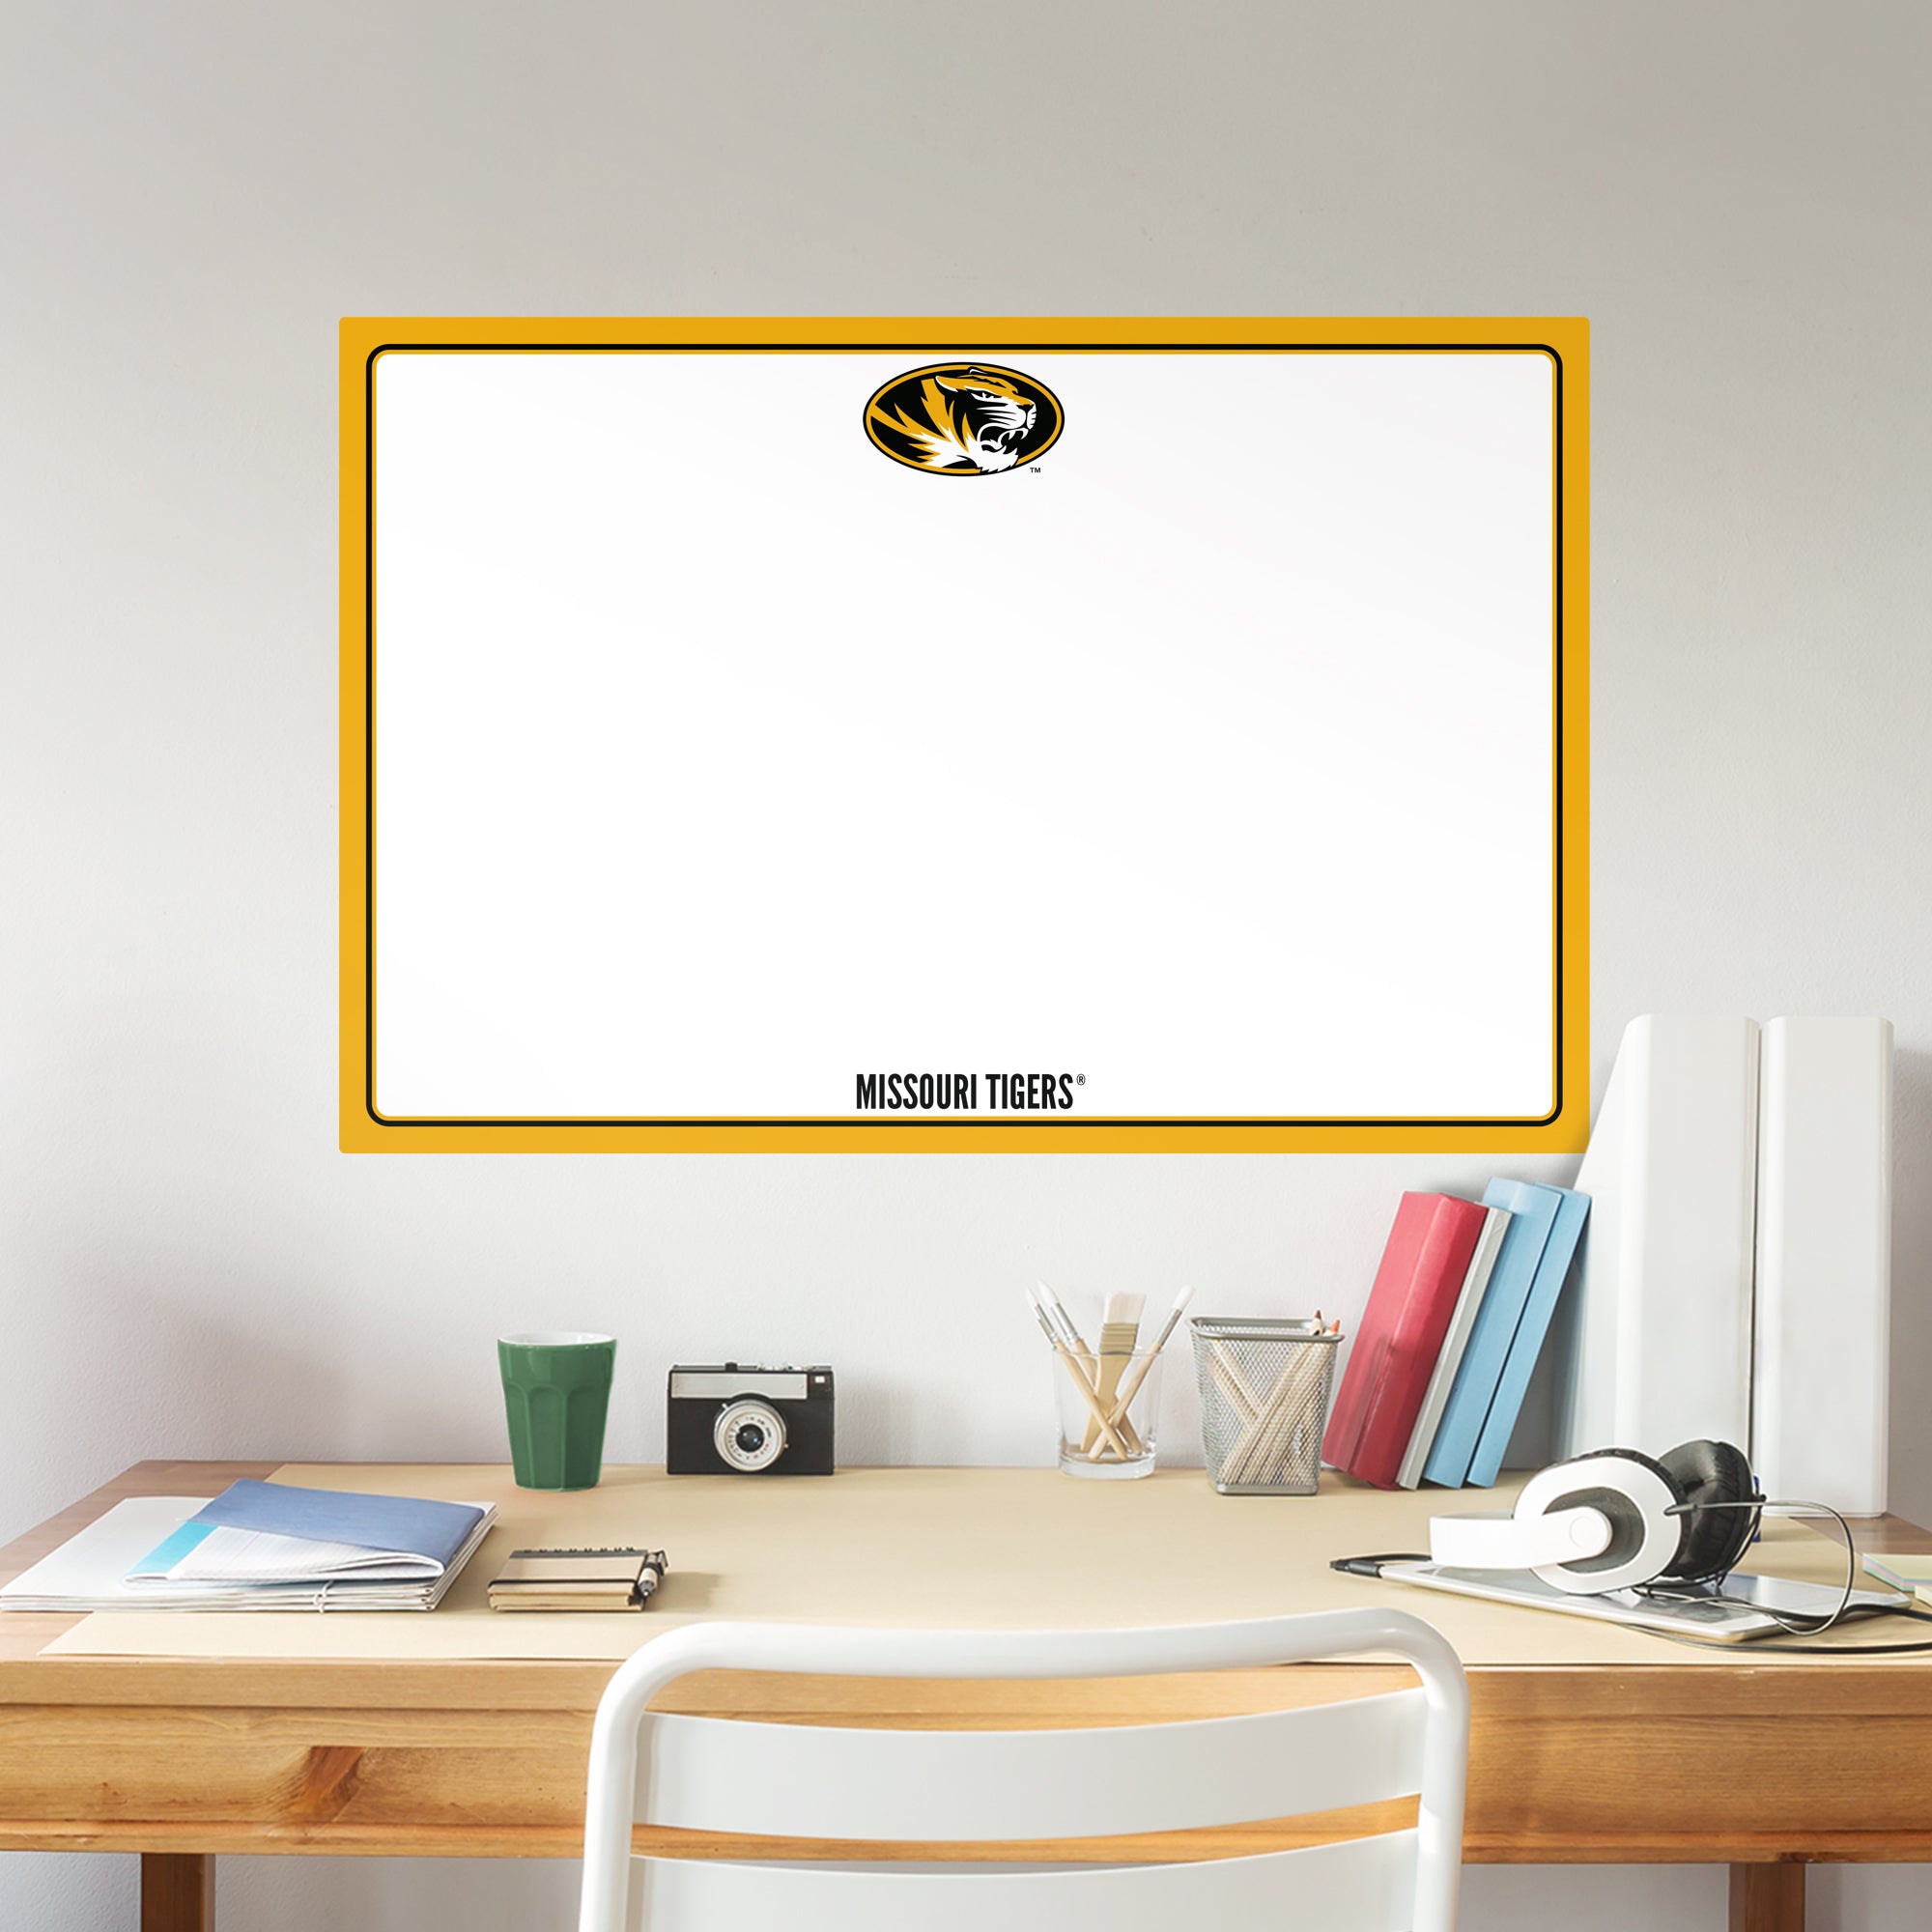 Missouri Tigers: Dry Erase Whiteboard - X-Large Officially Licensed NCAA Removable Wall Decal XL by Fathead | Vinyl